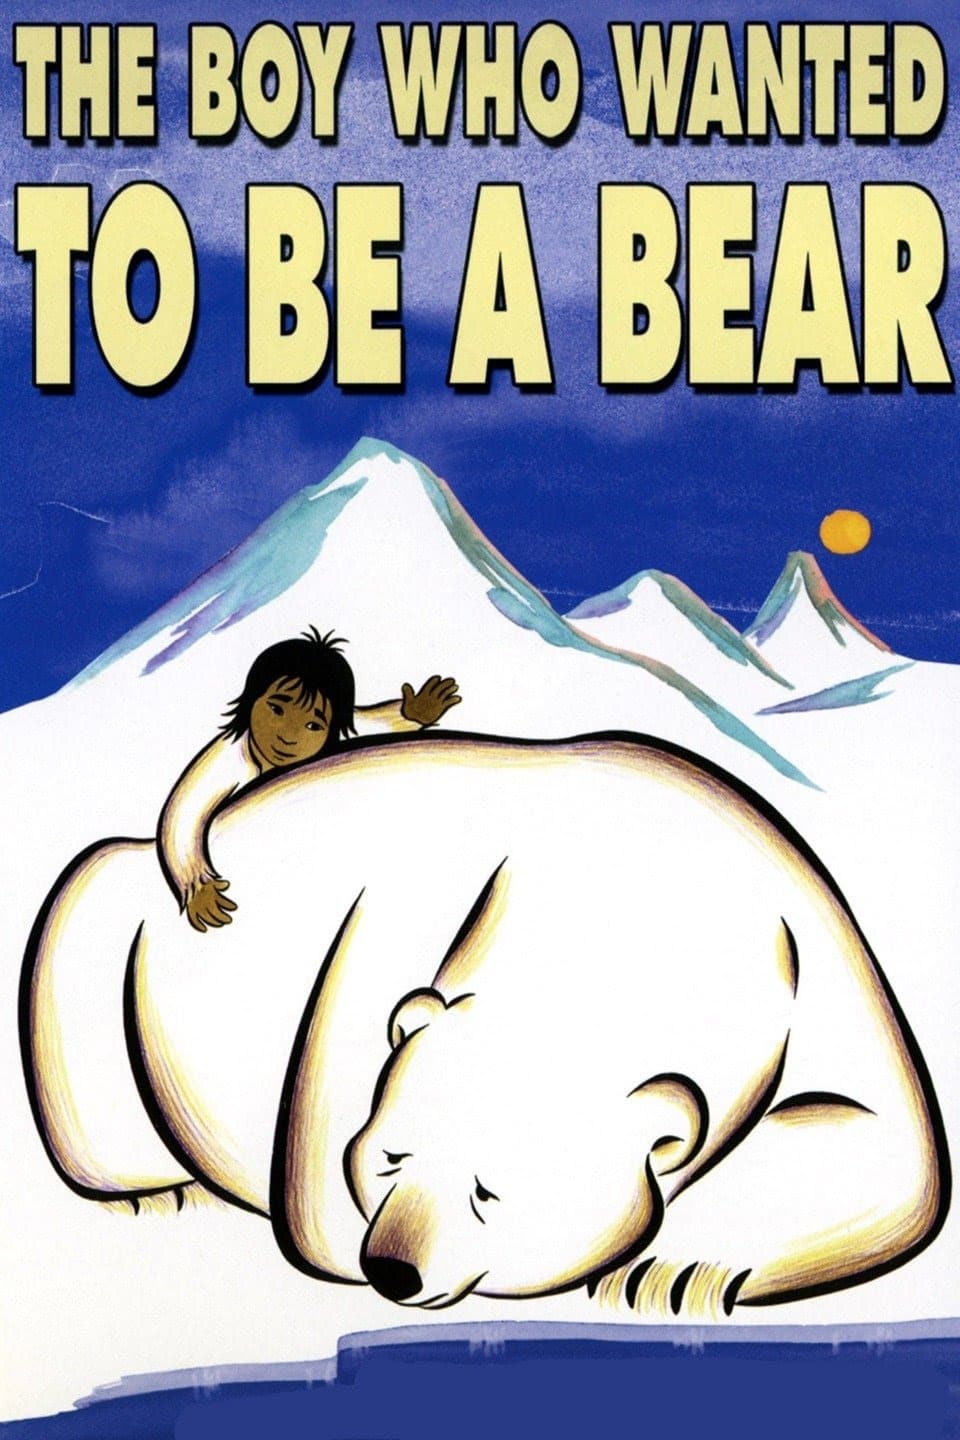 The Boy Who Wanted to Be a Bear